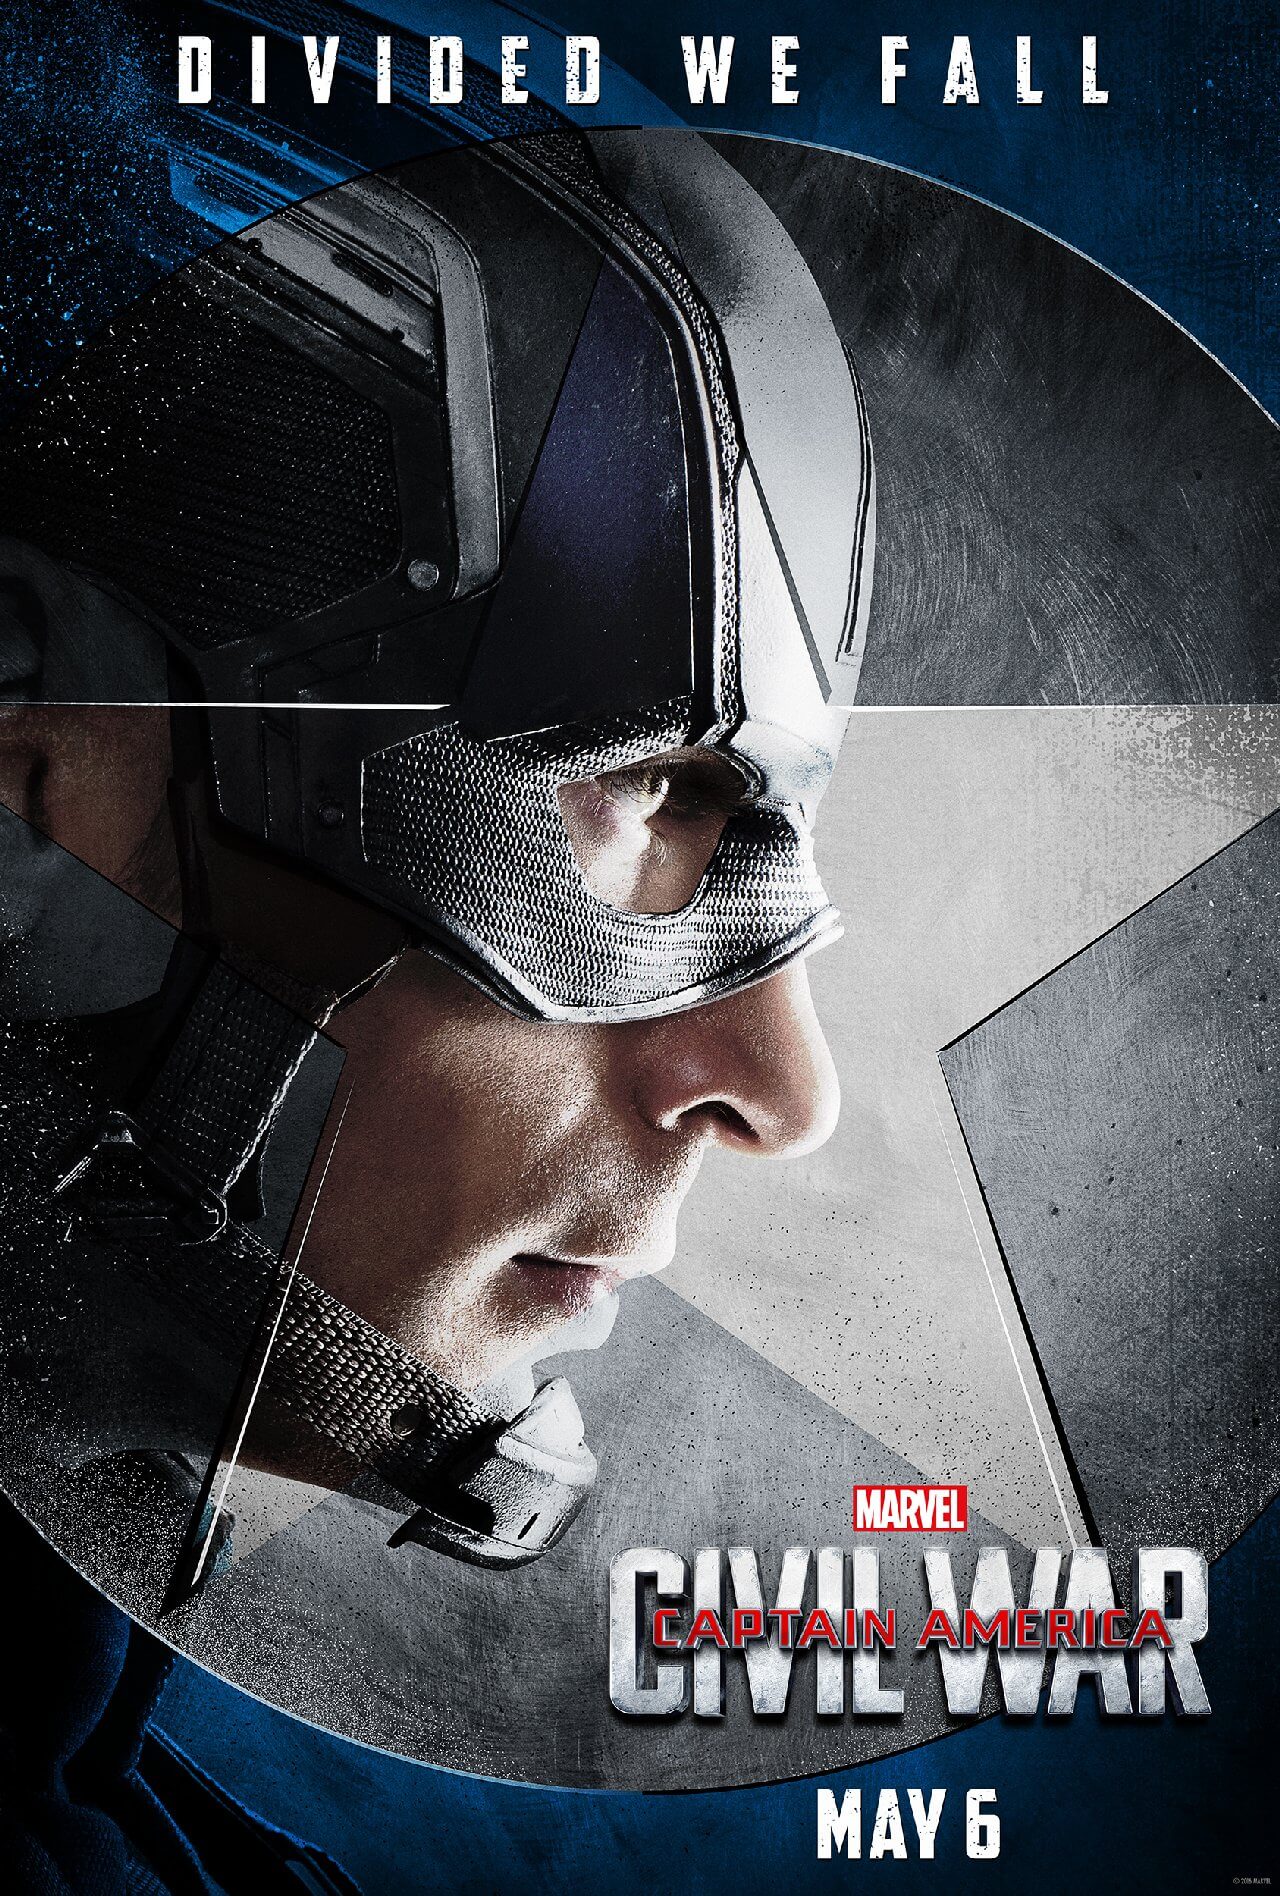 CAPTAIN AMERICA: CIVIL WAR character posters | Midroad Movie Review